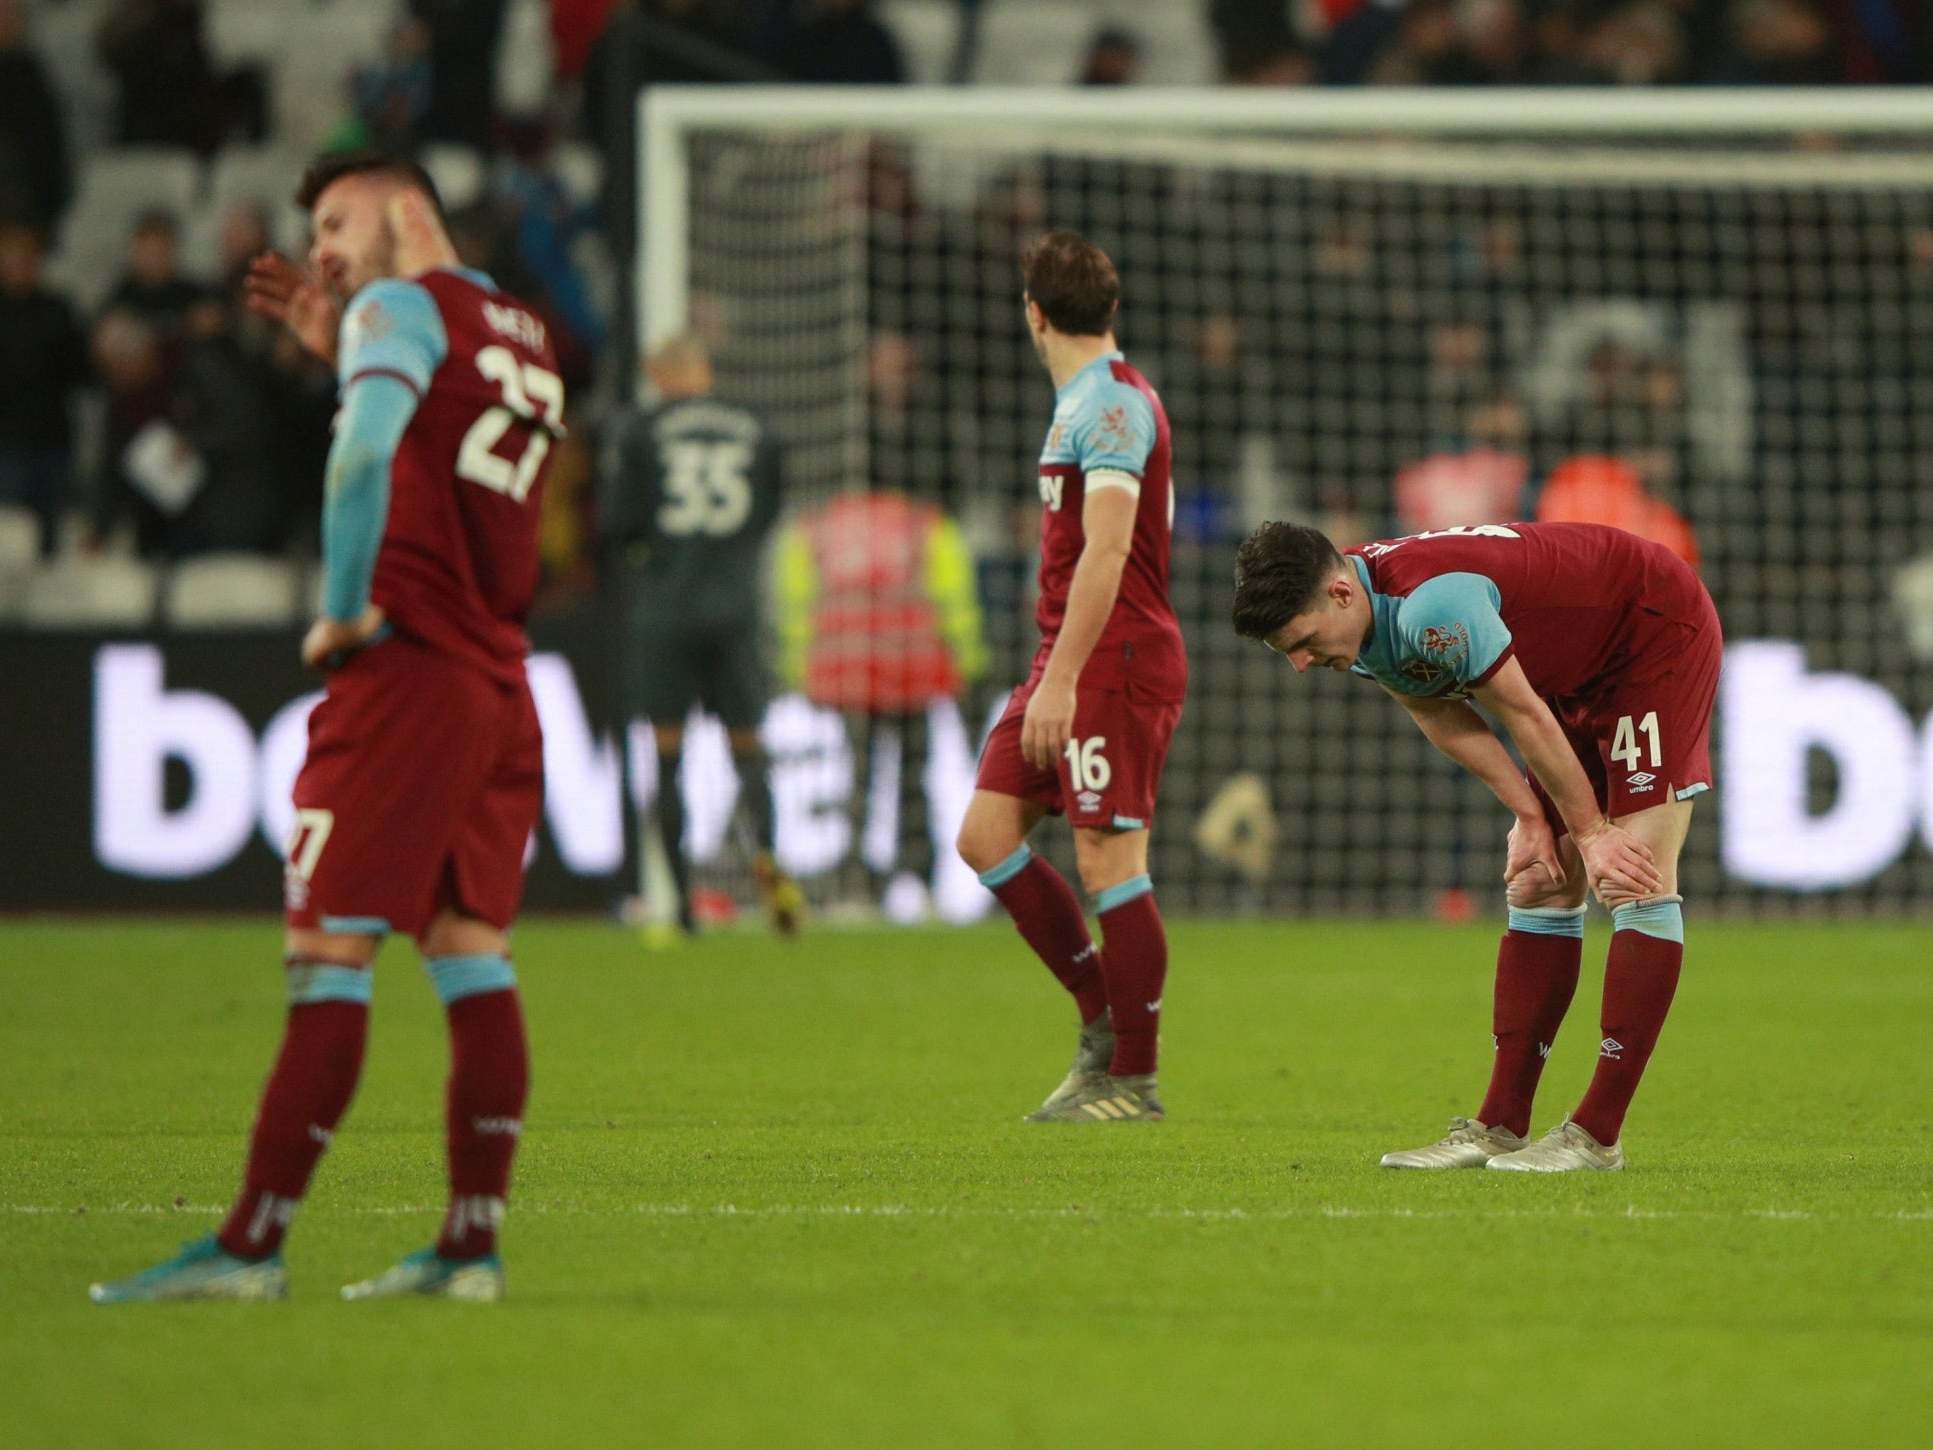 West Ham appear dejected after defeat to West Brom